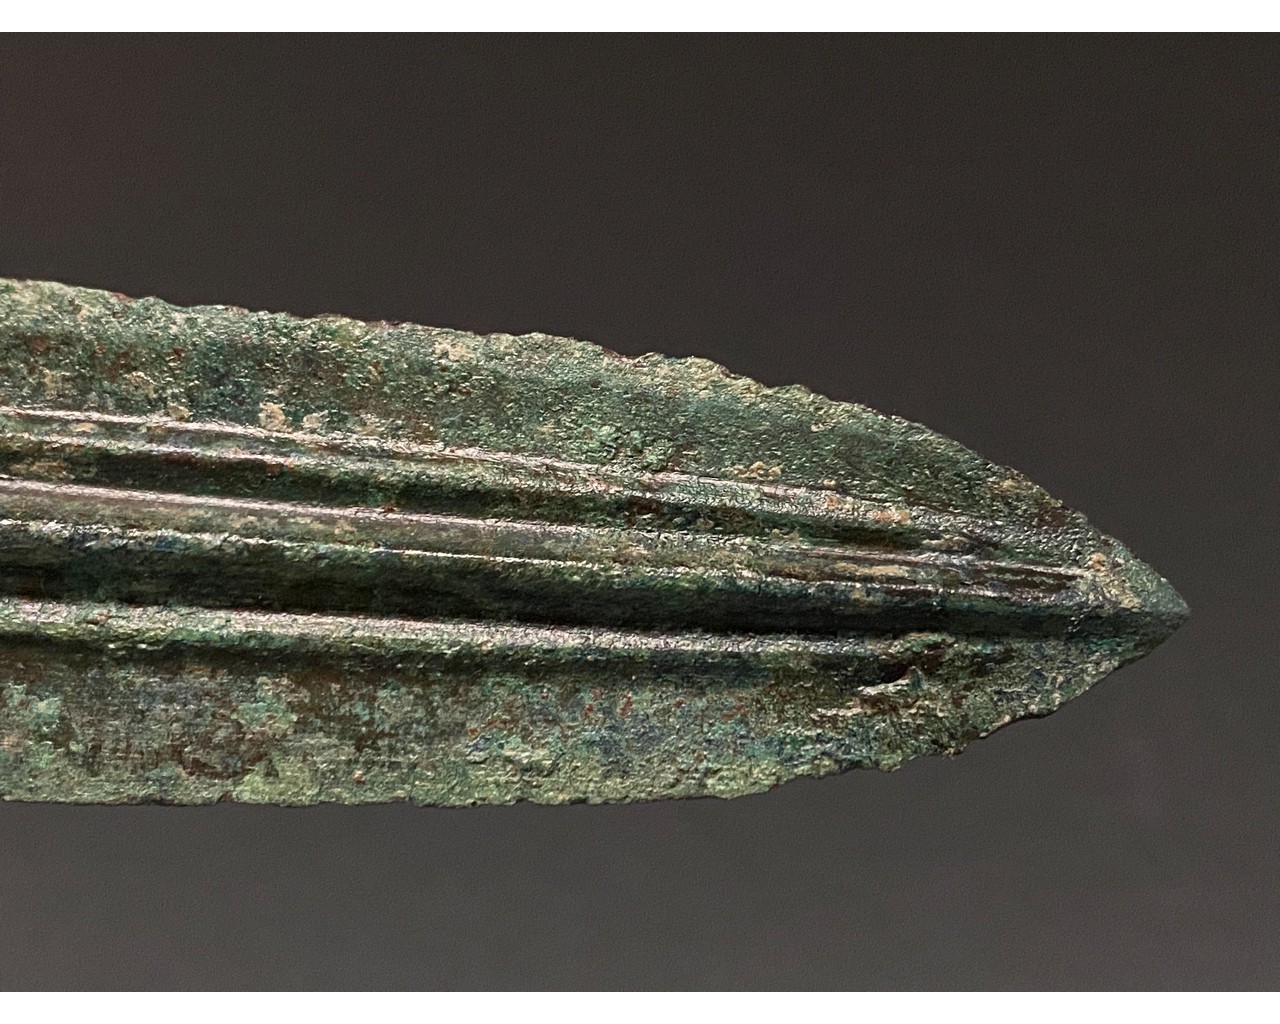 MAGNIFICENT ANCIENT BRONZE DECORATED SPEAR ON STAND - Image 6 of 7